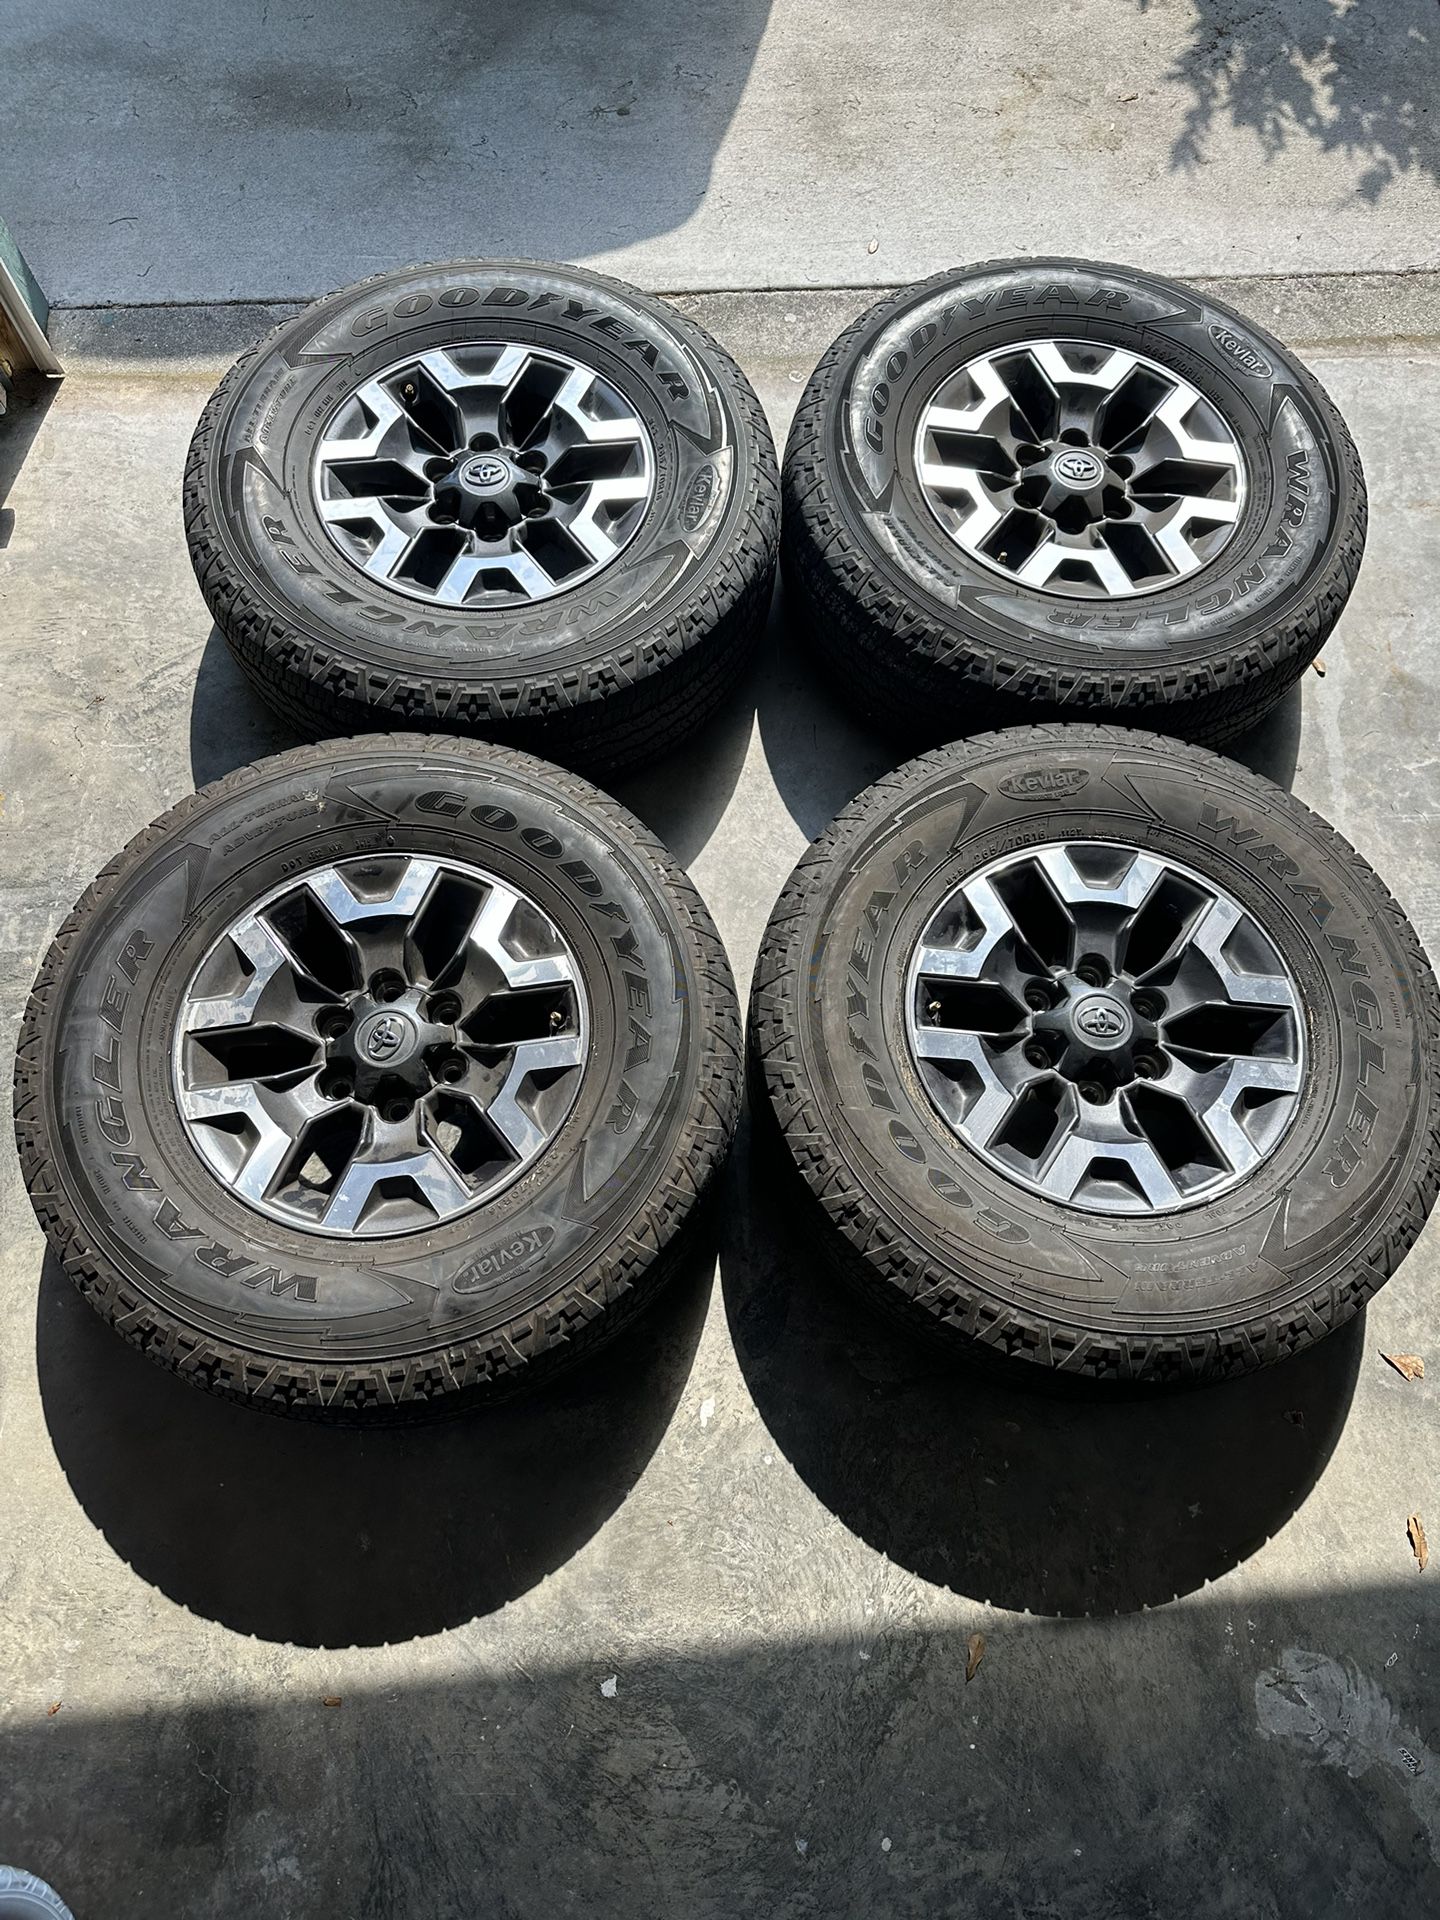 Toyota Rims And Tires 265/70 16R